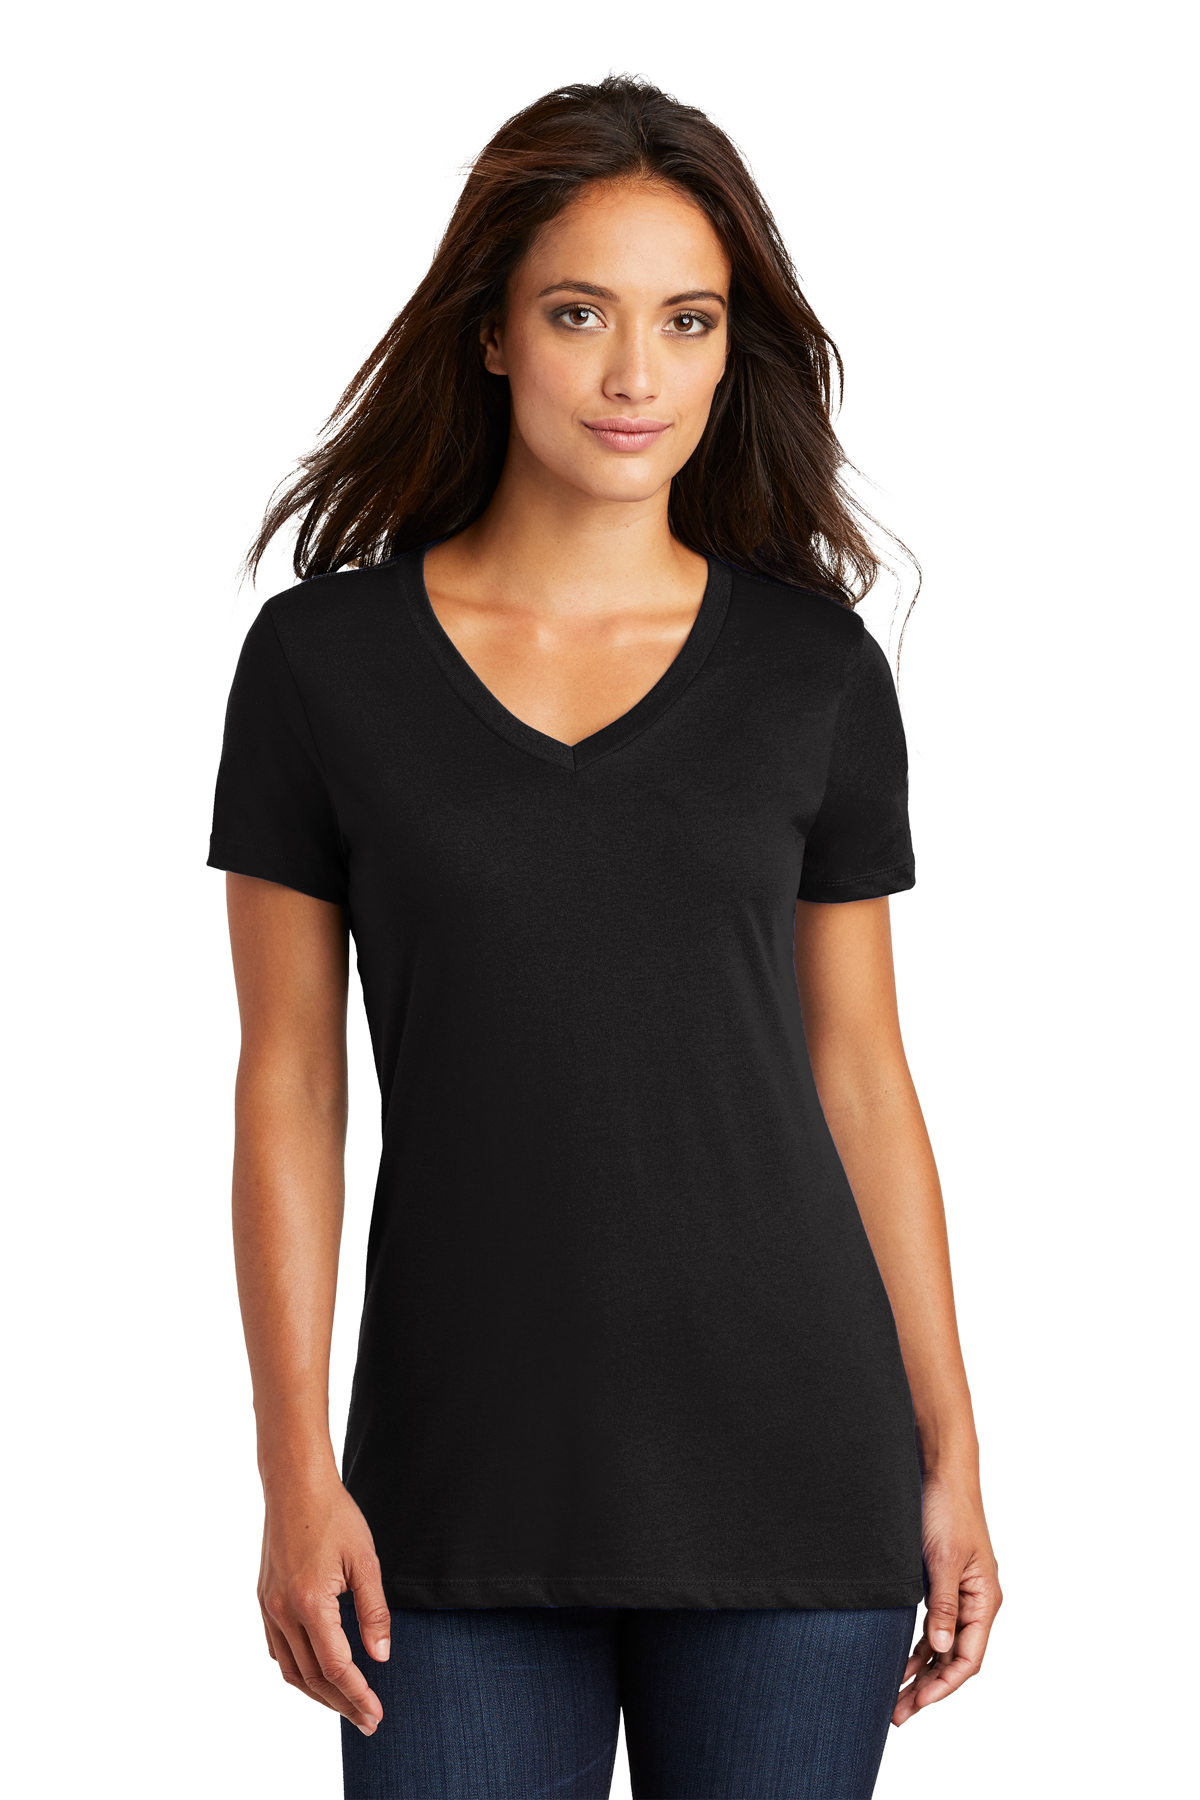 District Women's Perfect Weight V-Neck Tee, Product